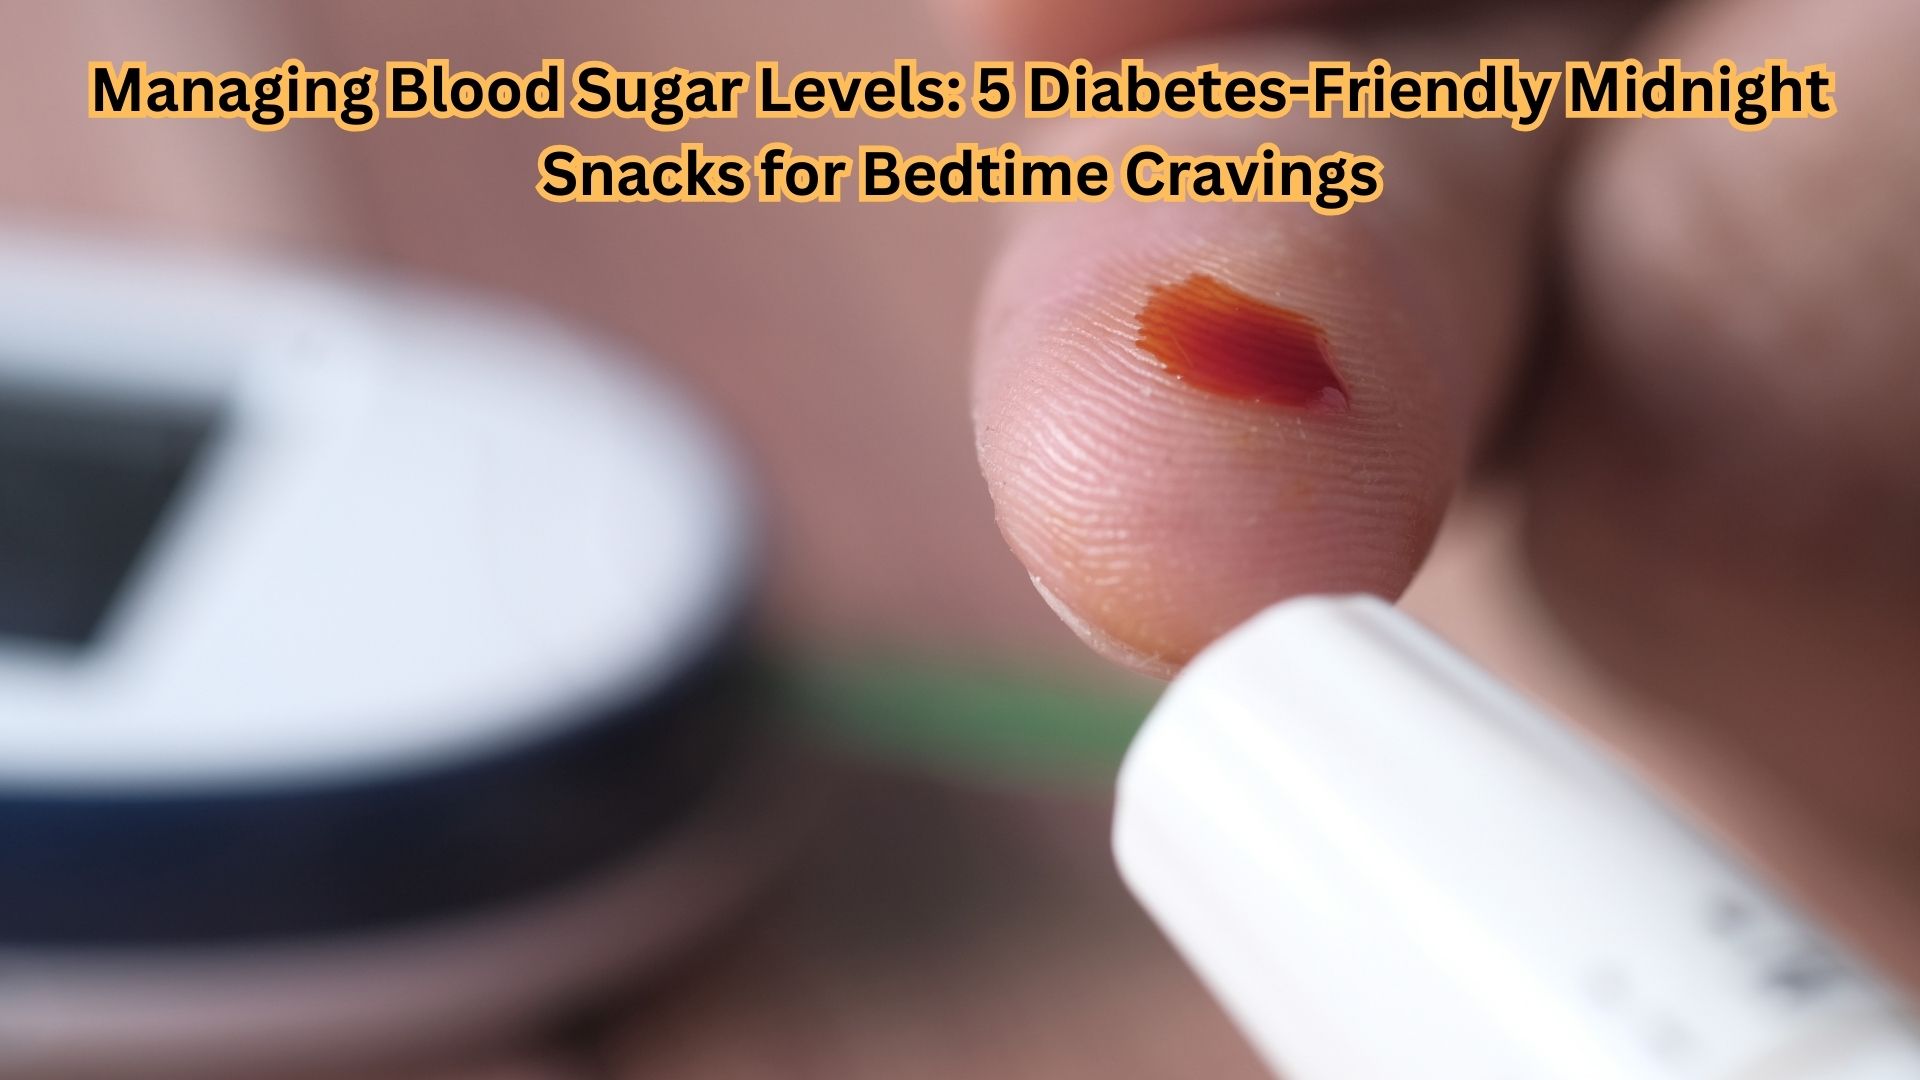 Managing Blood Sugar Levels: 5 Diabetes-Friendly Midnight Snacks for Bedtime Cravings